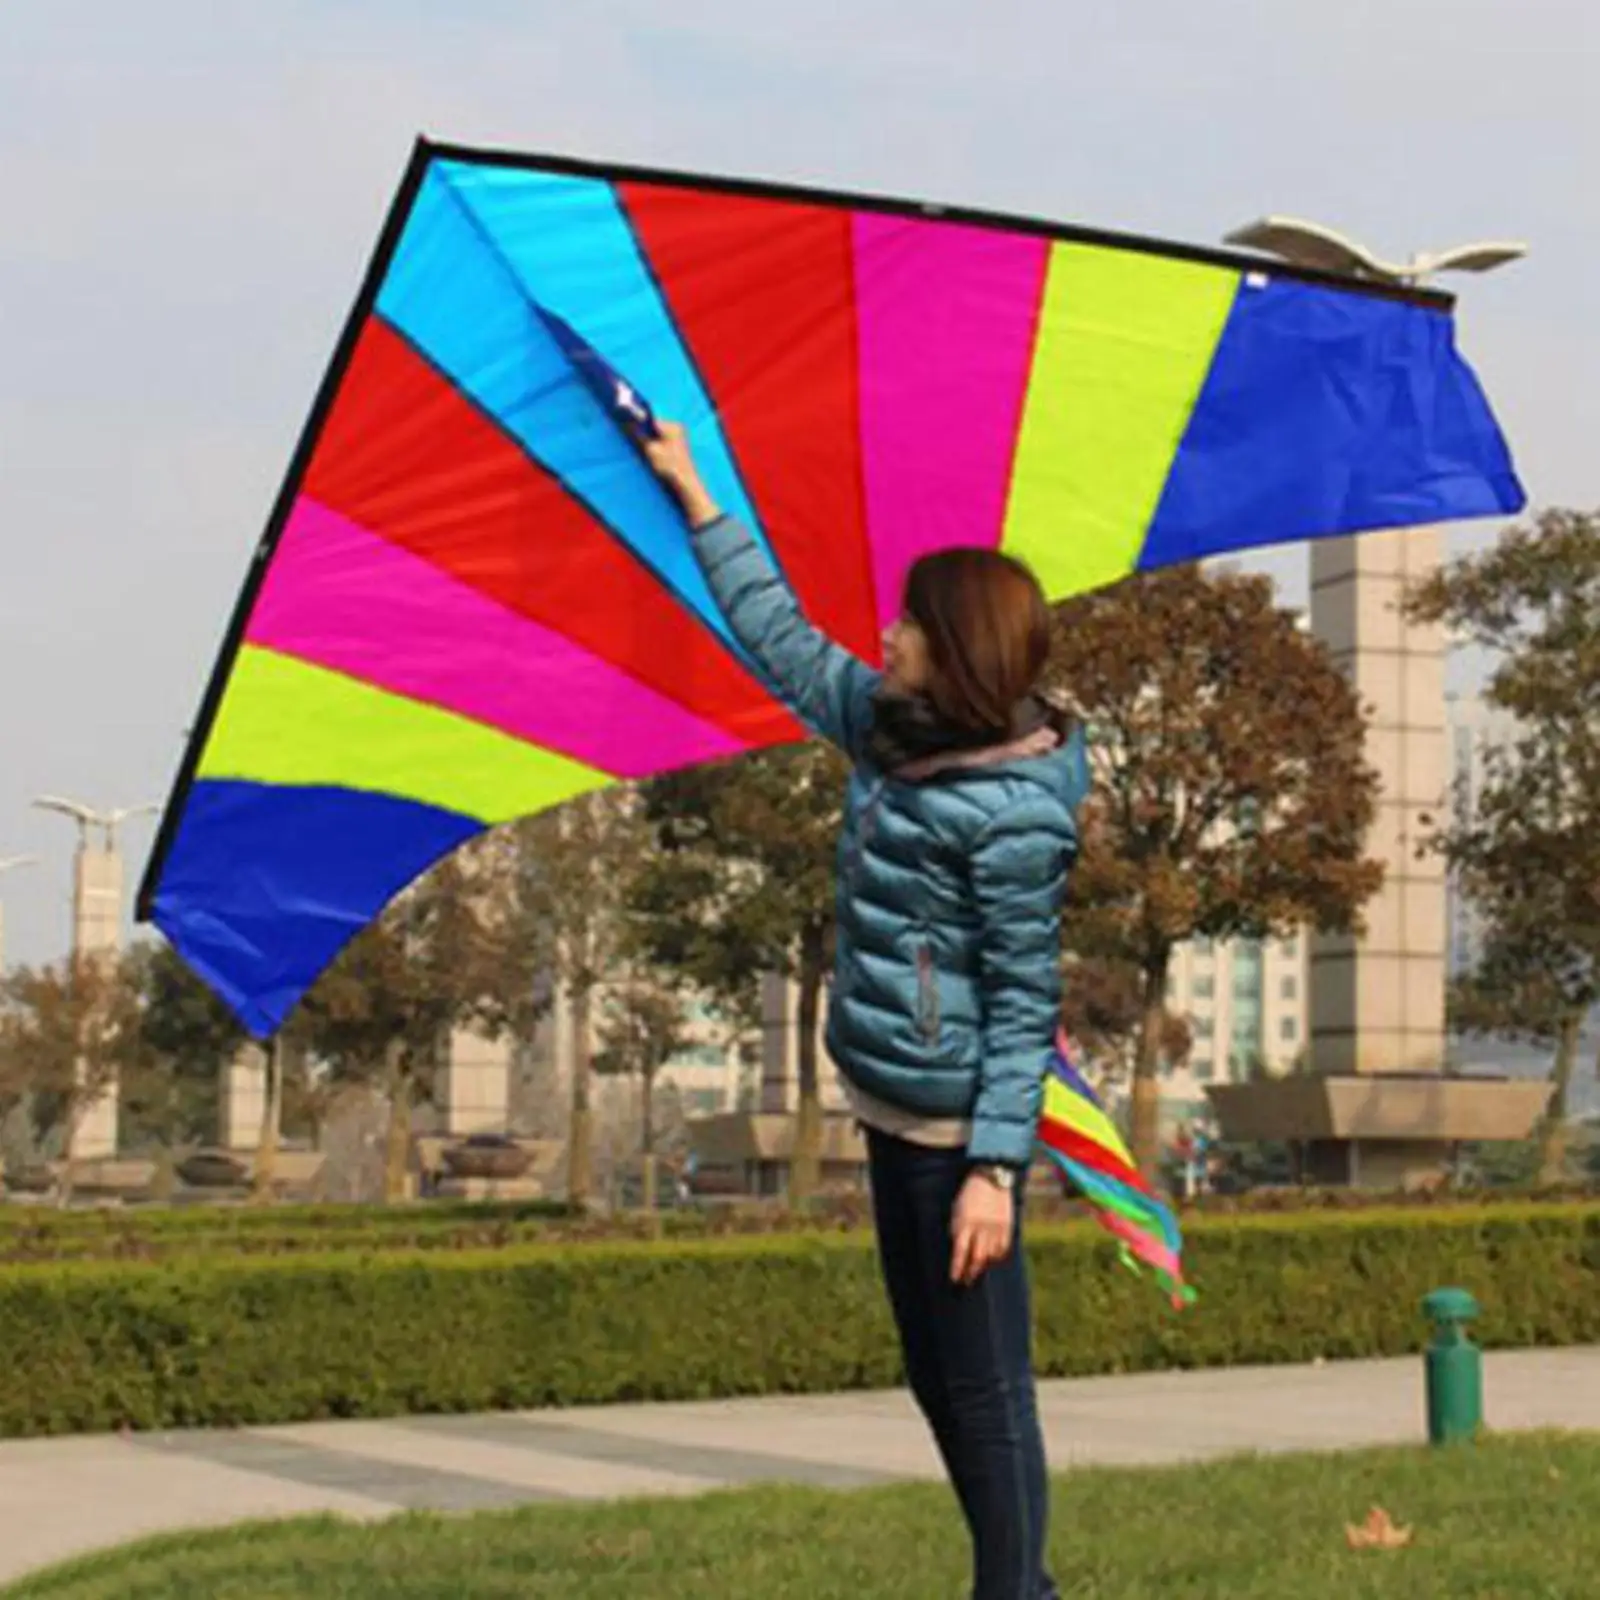 Colorful Delta Kite with String Windsock Single Line with Tail Large for Sports Garden Beginner Kids Adults Teenagers